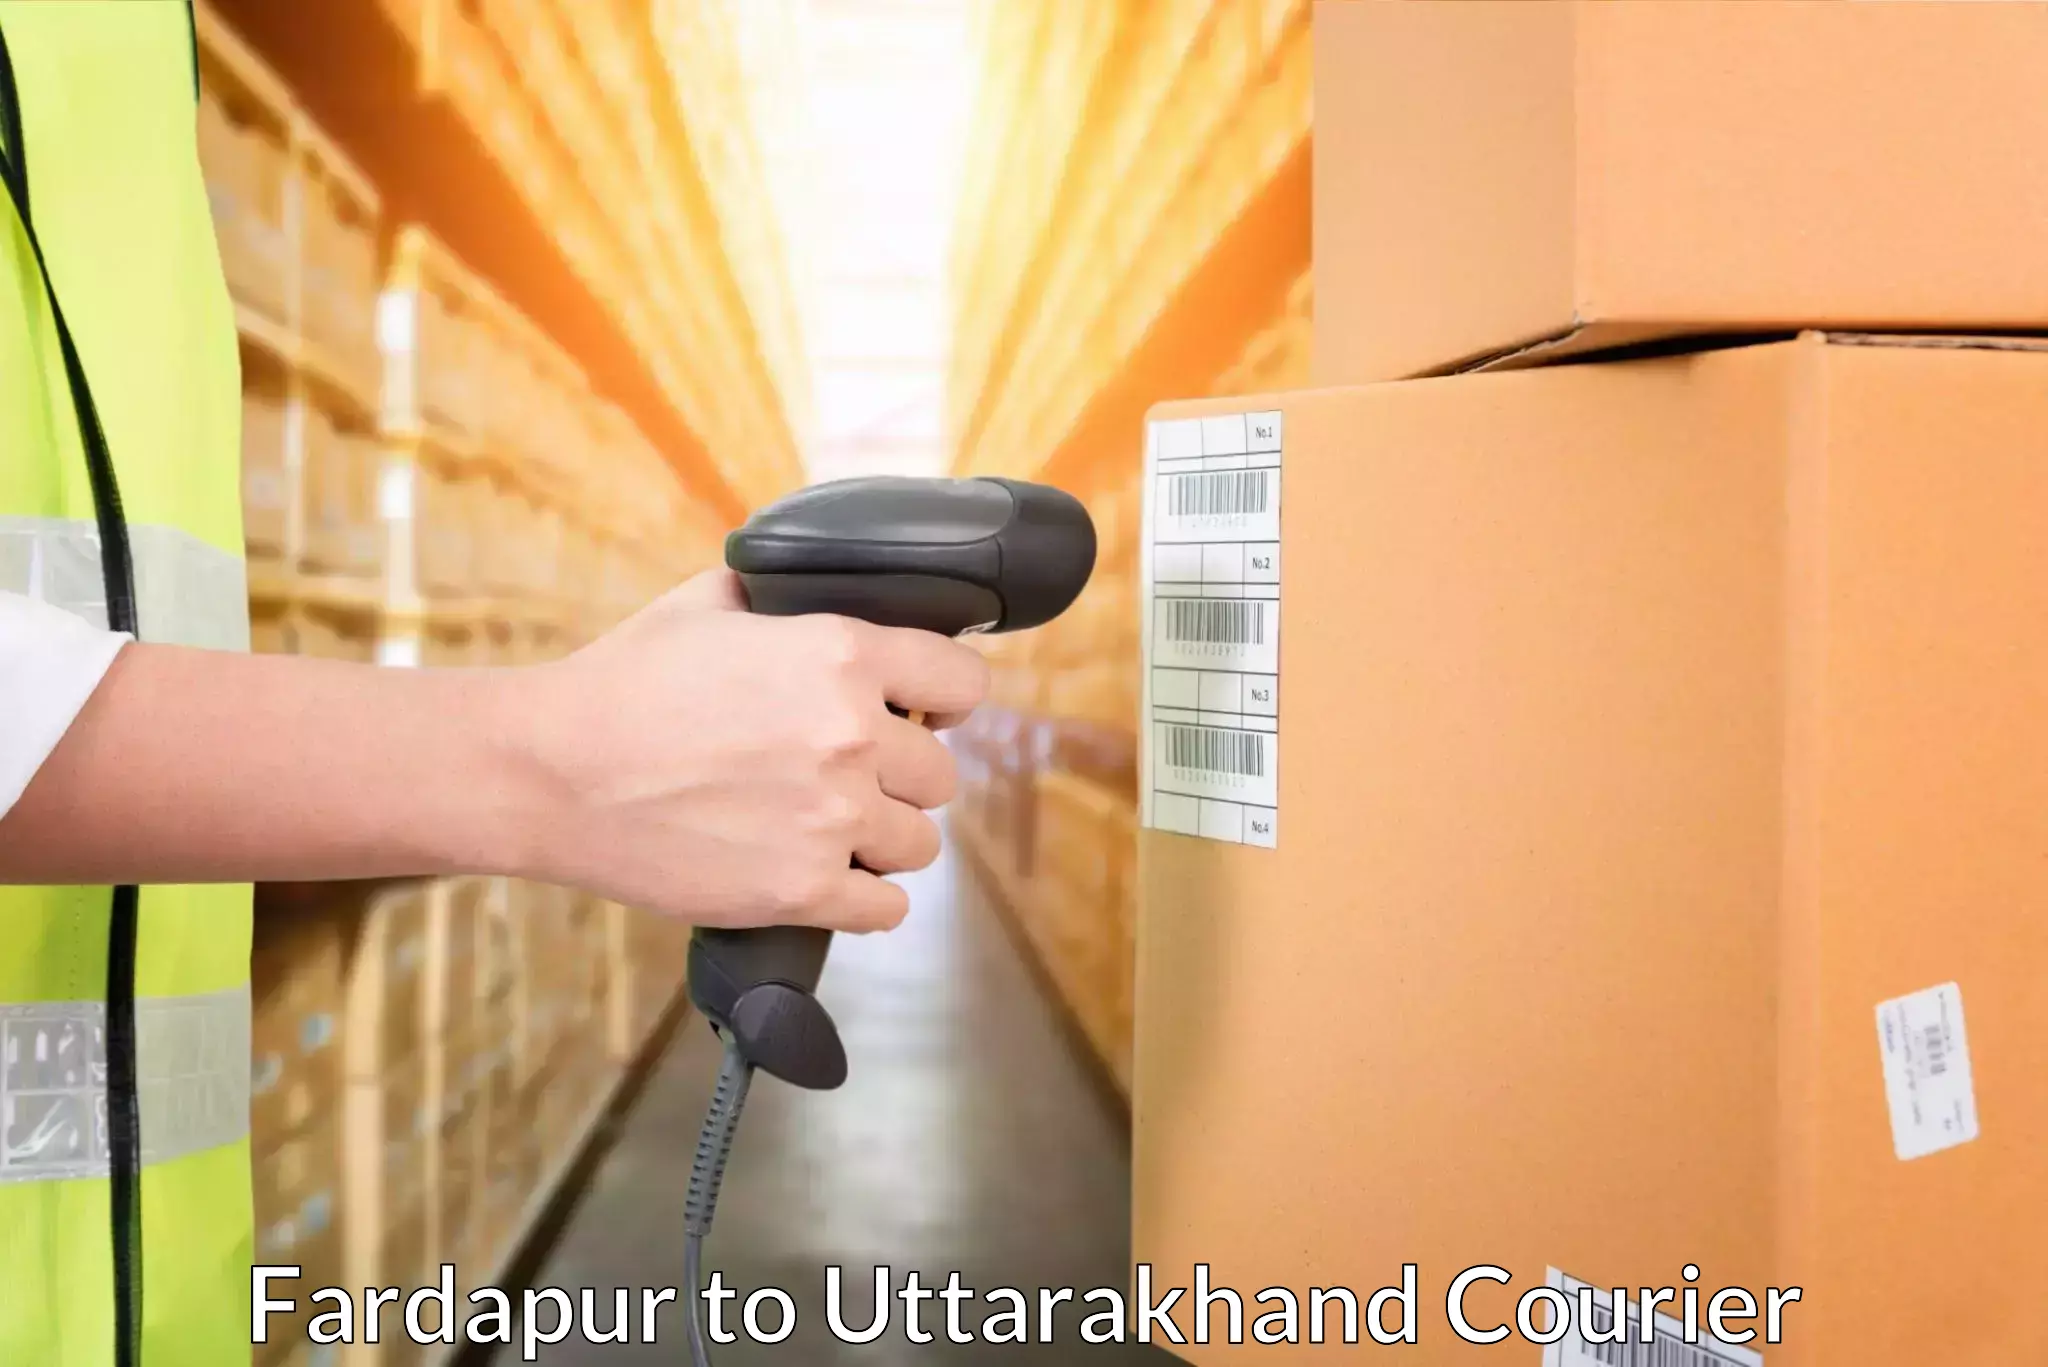 State-of-the-art courier technology Fardapur to Bhimtal